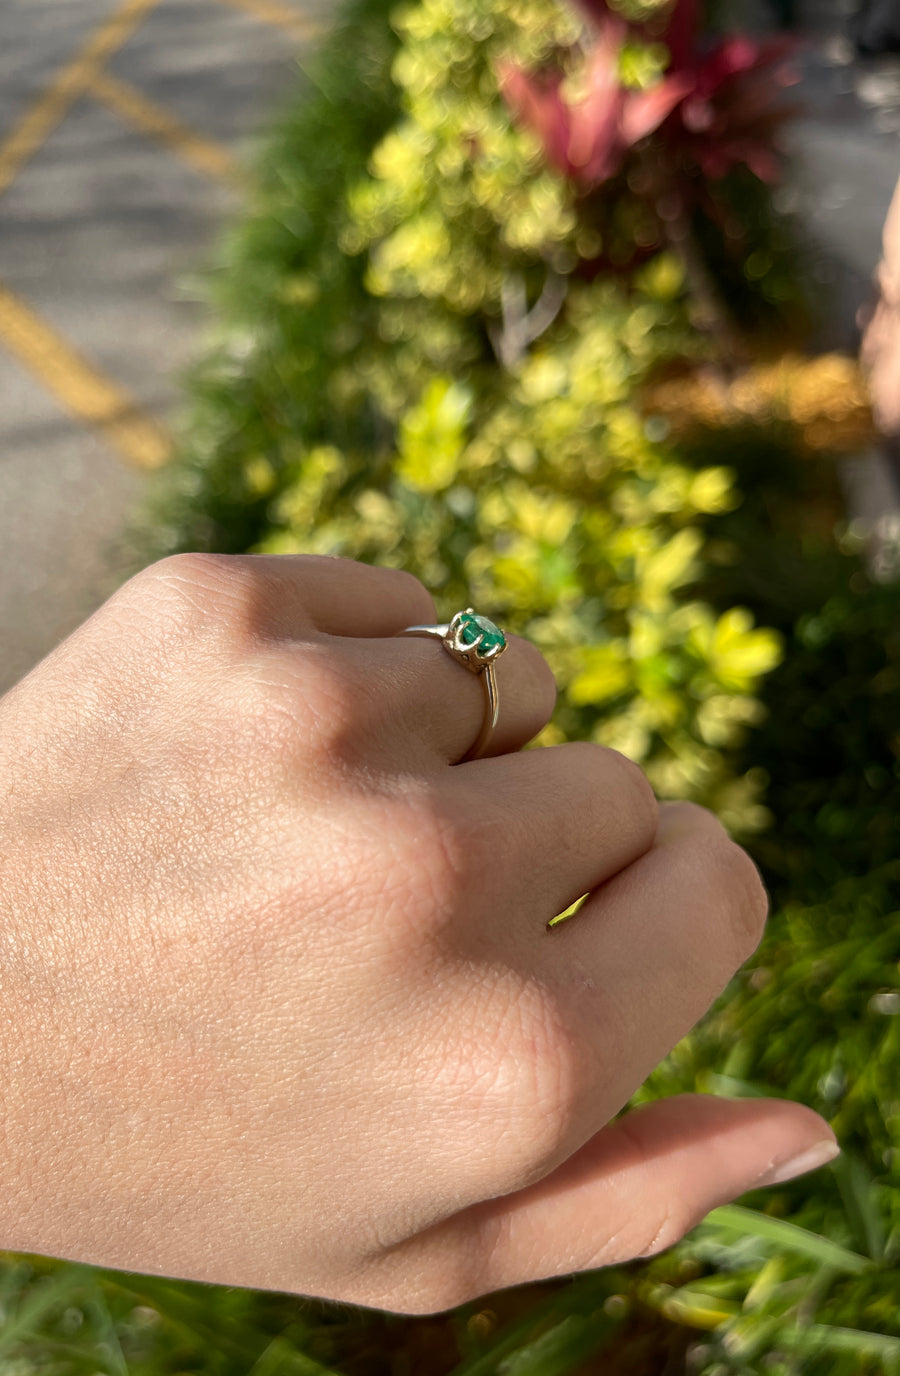 Chic and Sophisticated: 14K Gold Ring with 1.0 Carat Round Colombian Emerald - Anniversary Joy